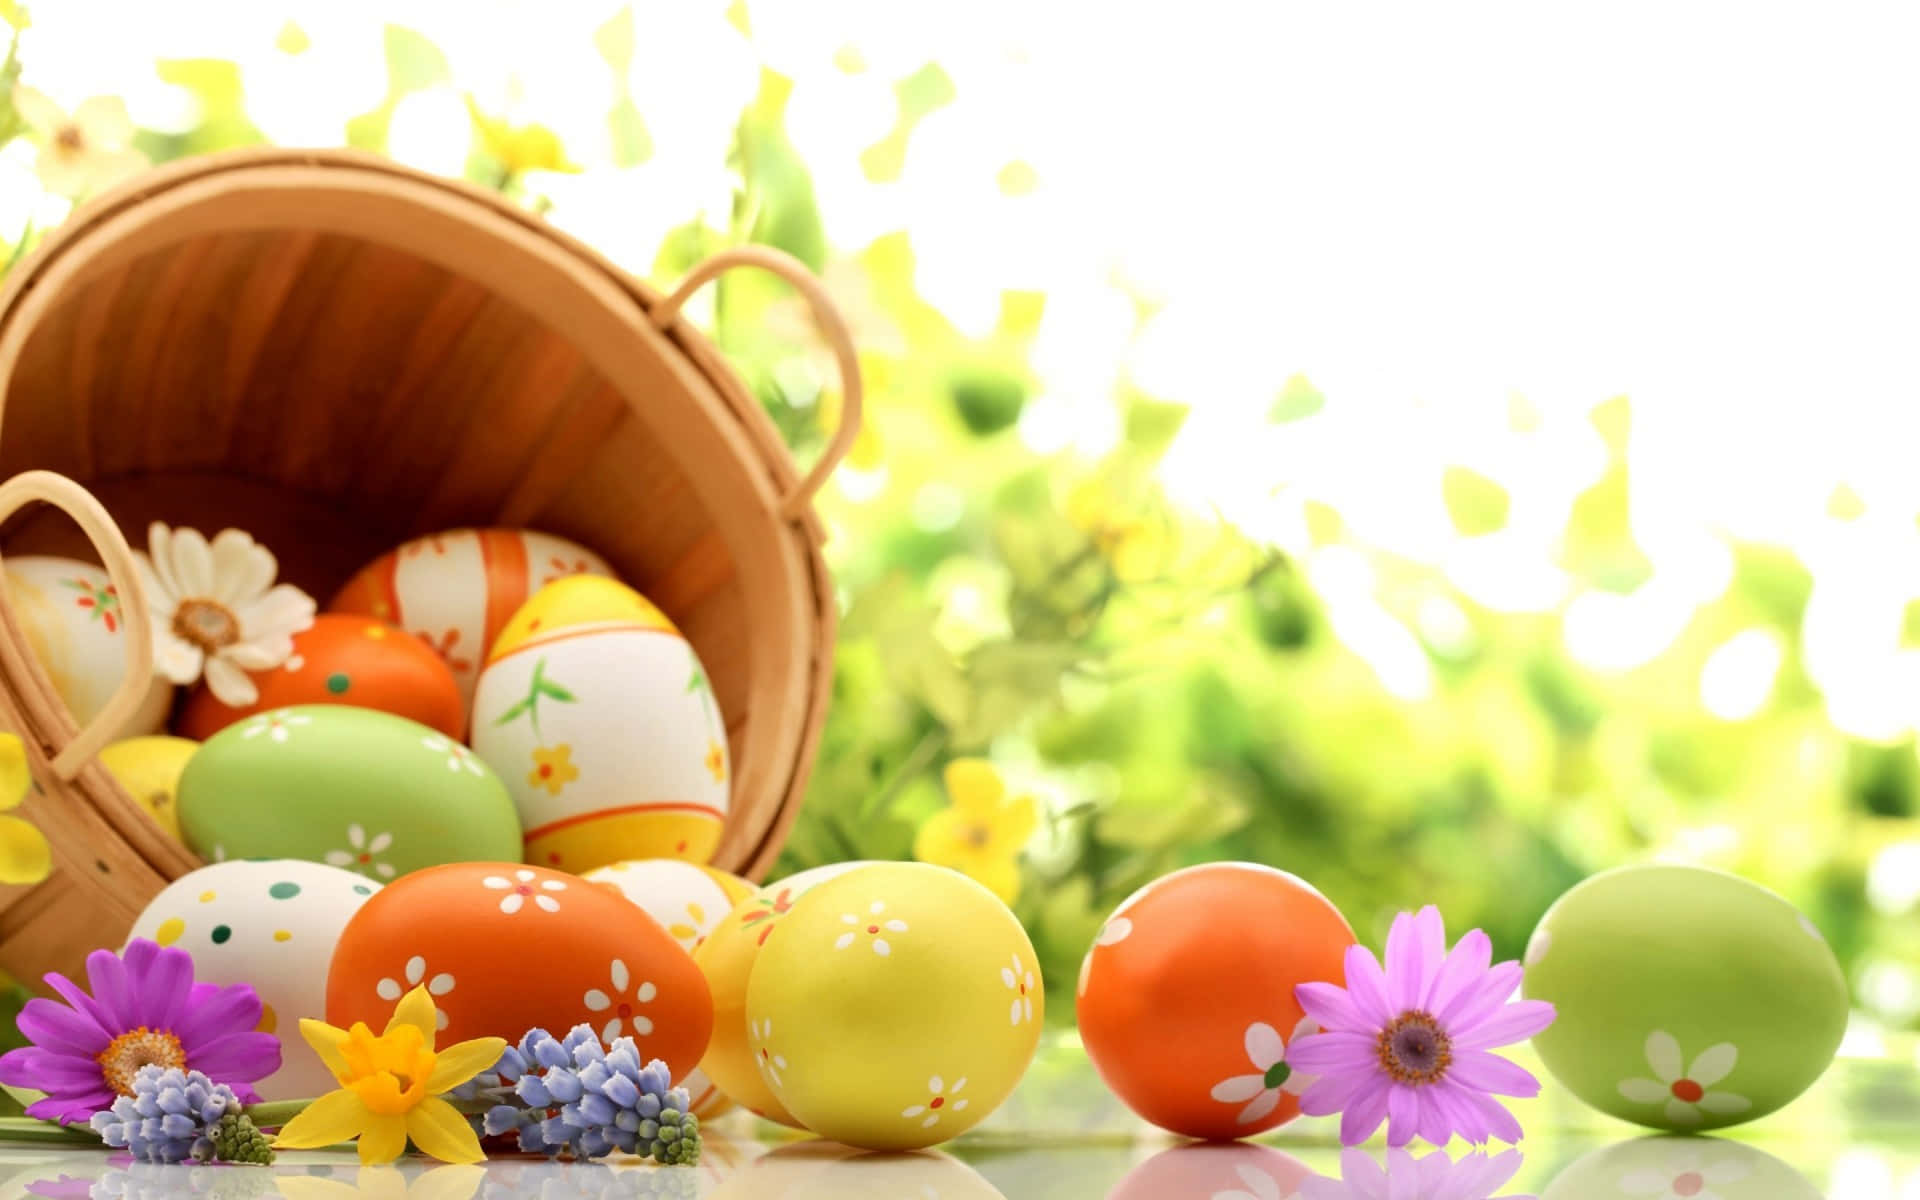 Adorable Easter Bunny Surrounded by Colorful Eggs on a Vibrant Spring Background